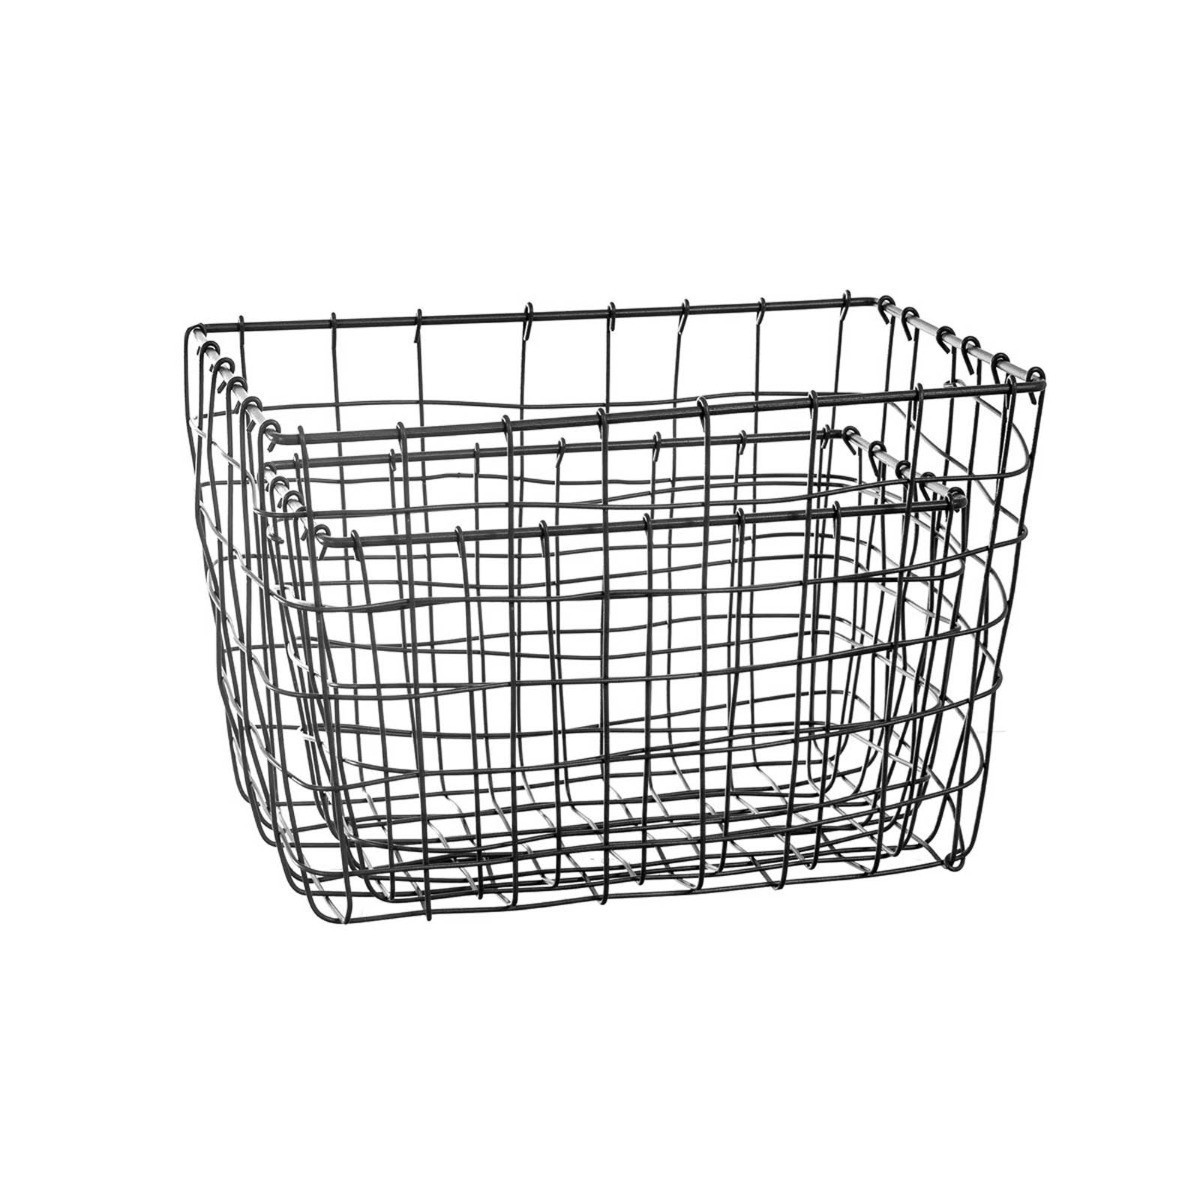 Sass & Belle Industrial Wire Baskets, 2 Pack - Black>